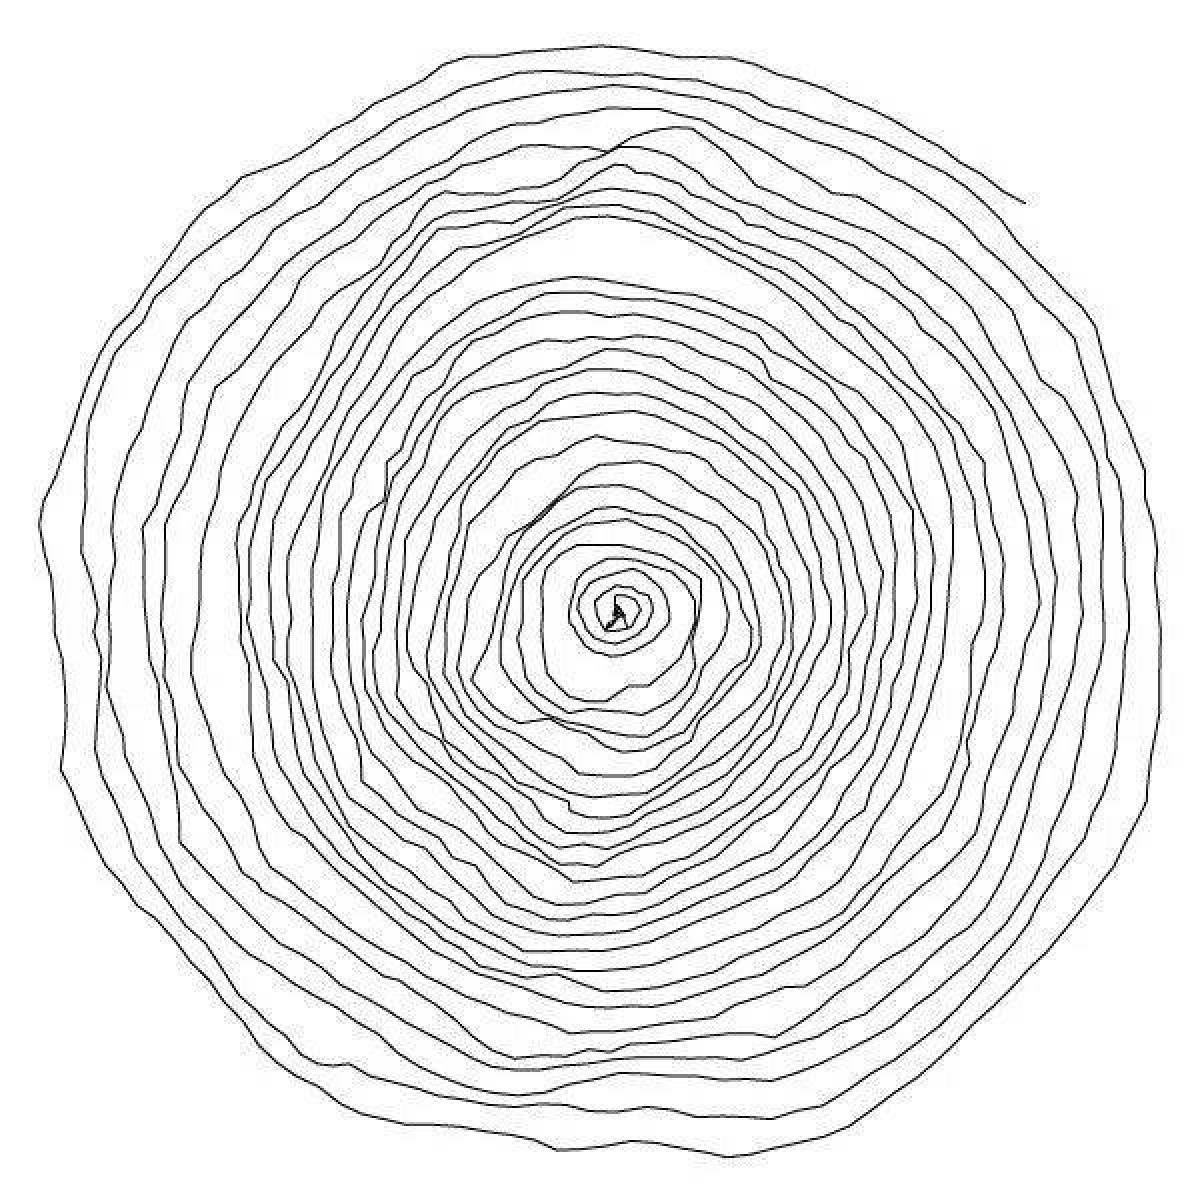 Coloring page lovely circular pattern